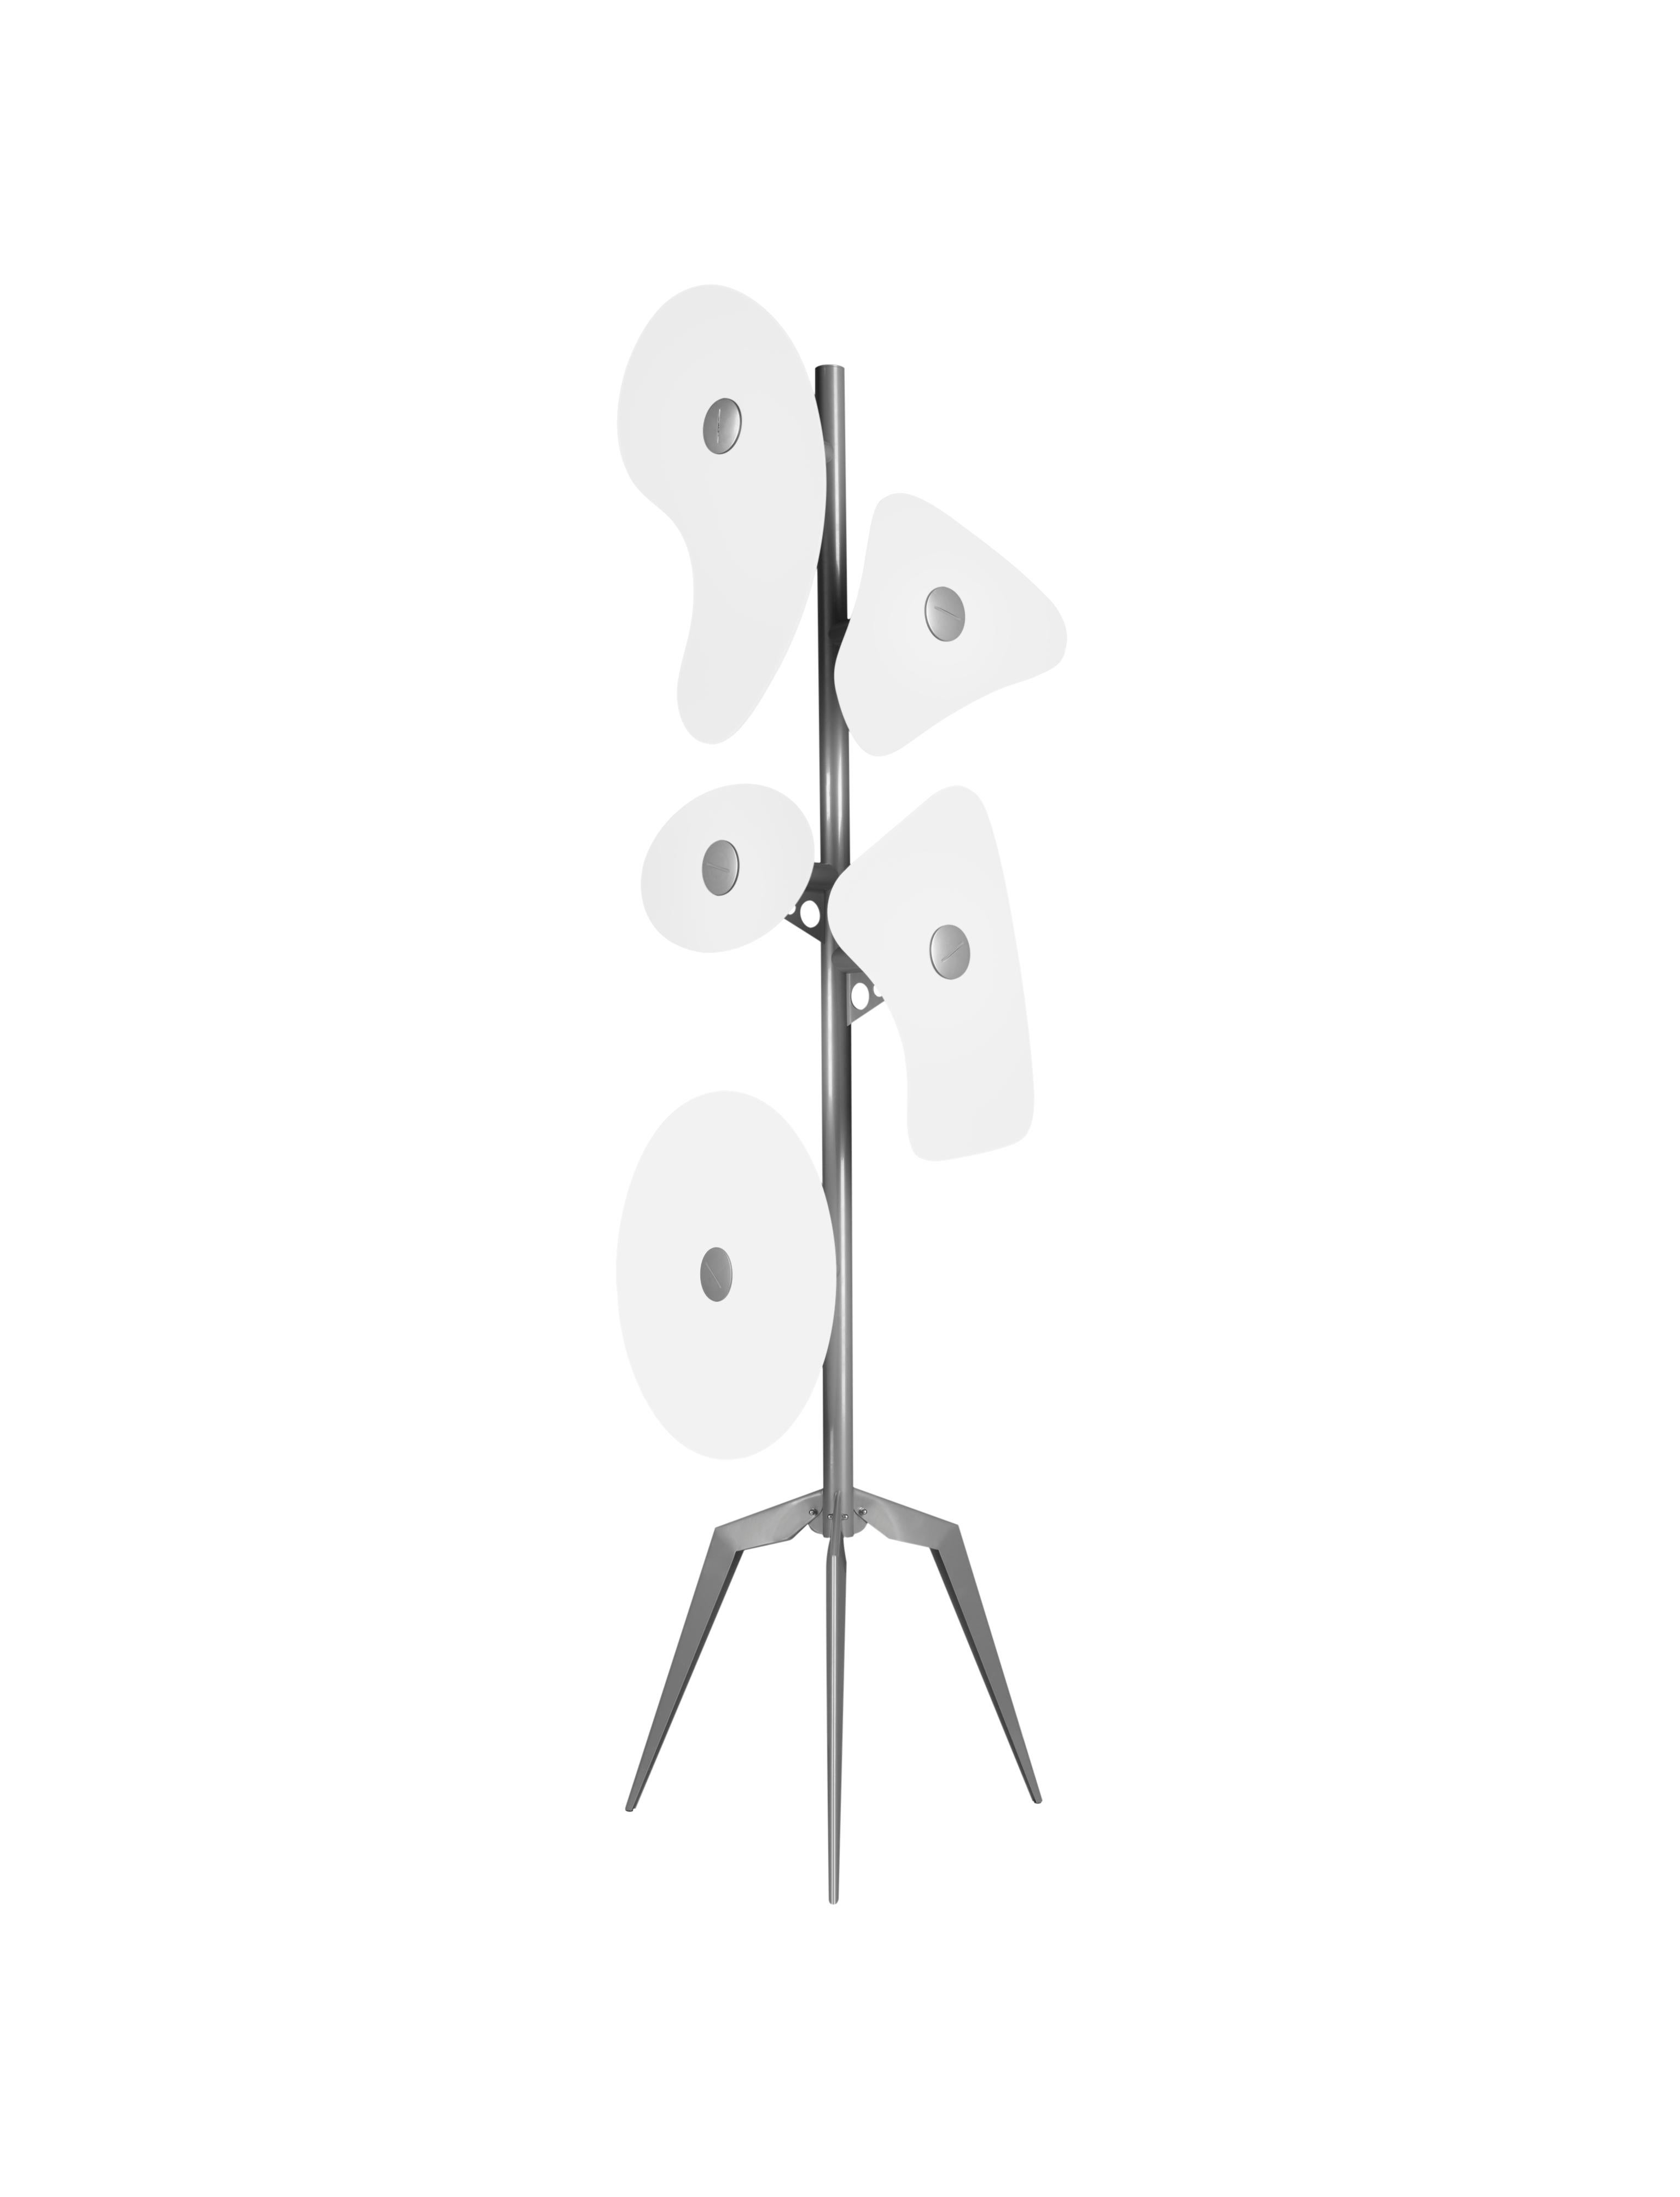 Floor lamp with diffused light. Epoxy powder coated metal tripod central frame and 5 different sized and shaped satin finish colored and painted glass diffusers, which are secured to the frame using epoxy powder coated metal glass-locks. ON/OFF